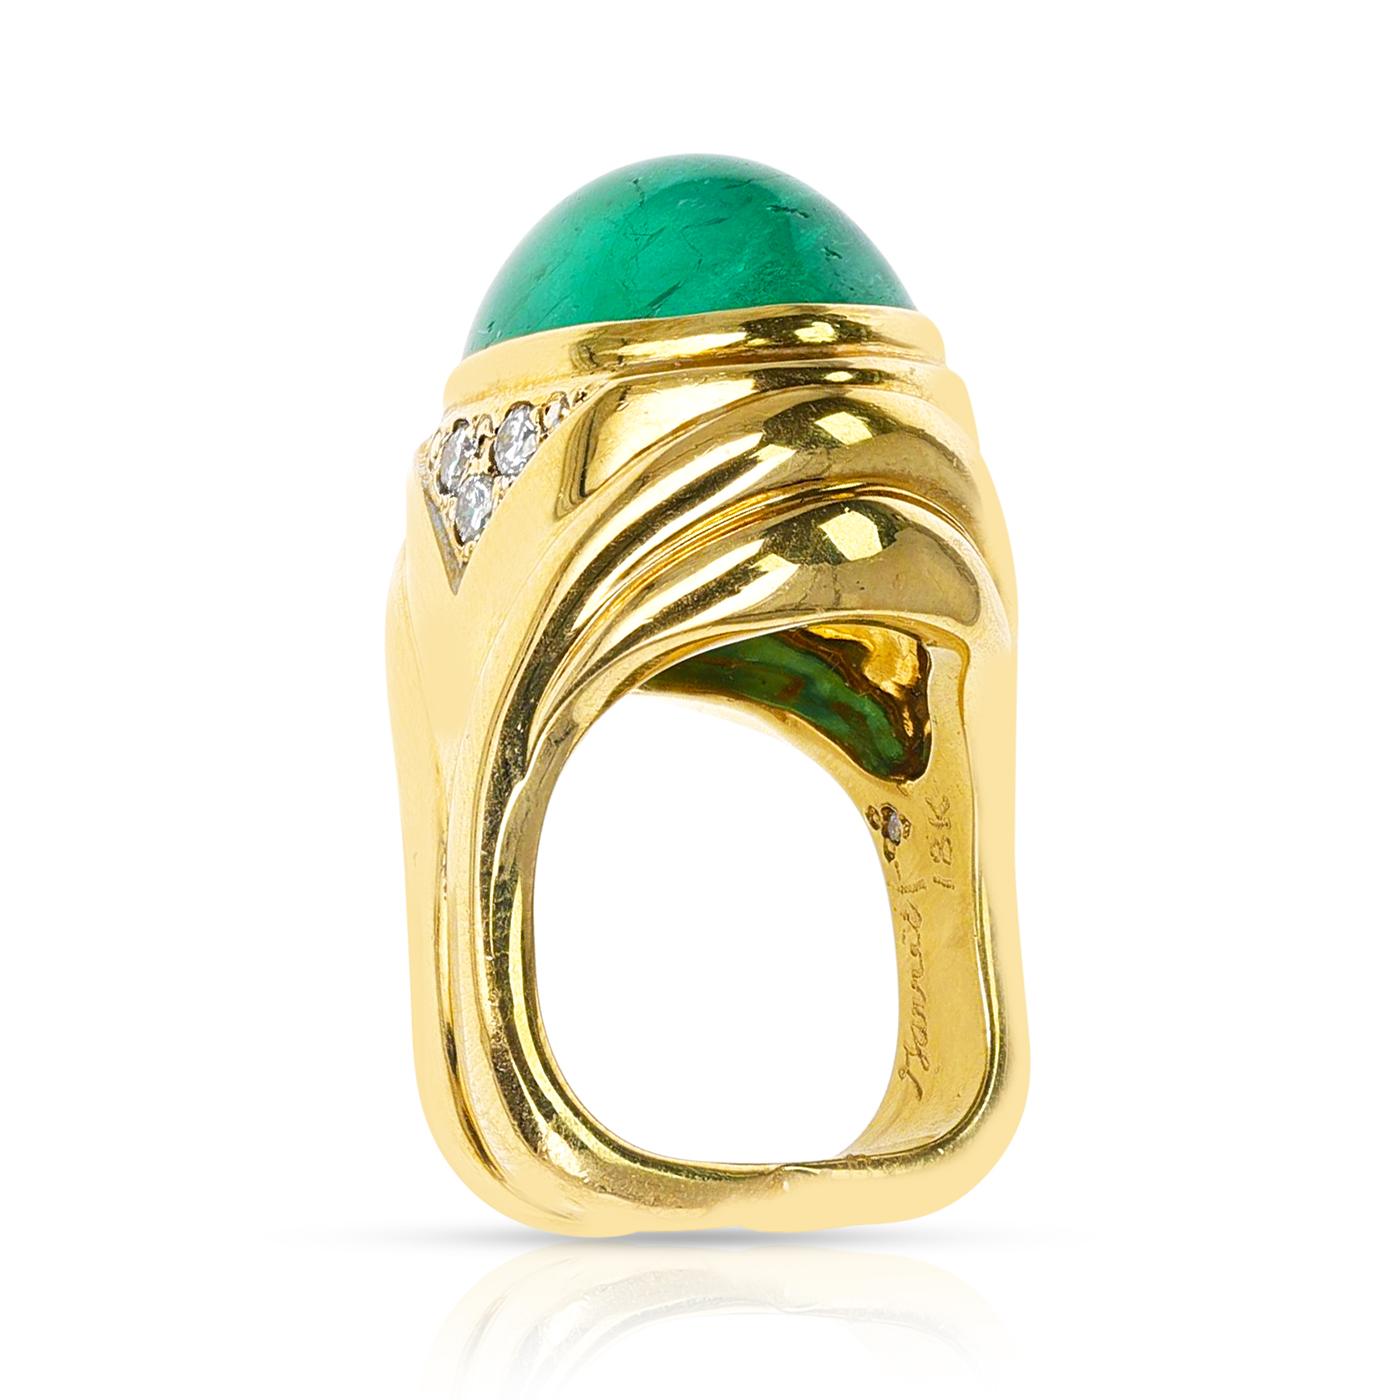 19.09 Ct. Emerald Cabochon Ring with Diamonds, 18K In Excellent Condition For Sale In New York, NY